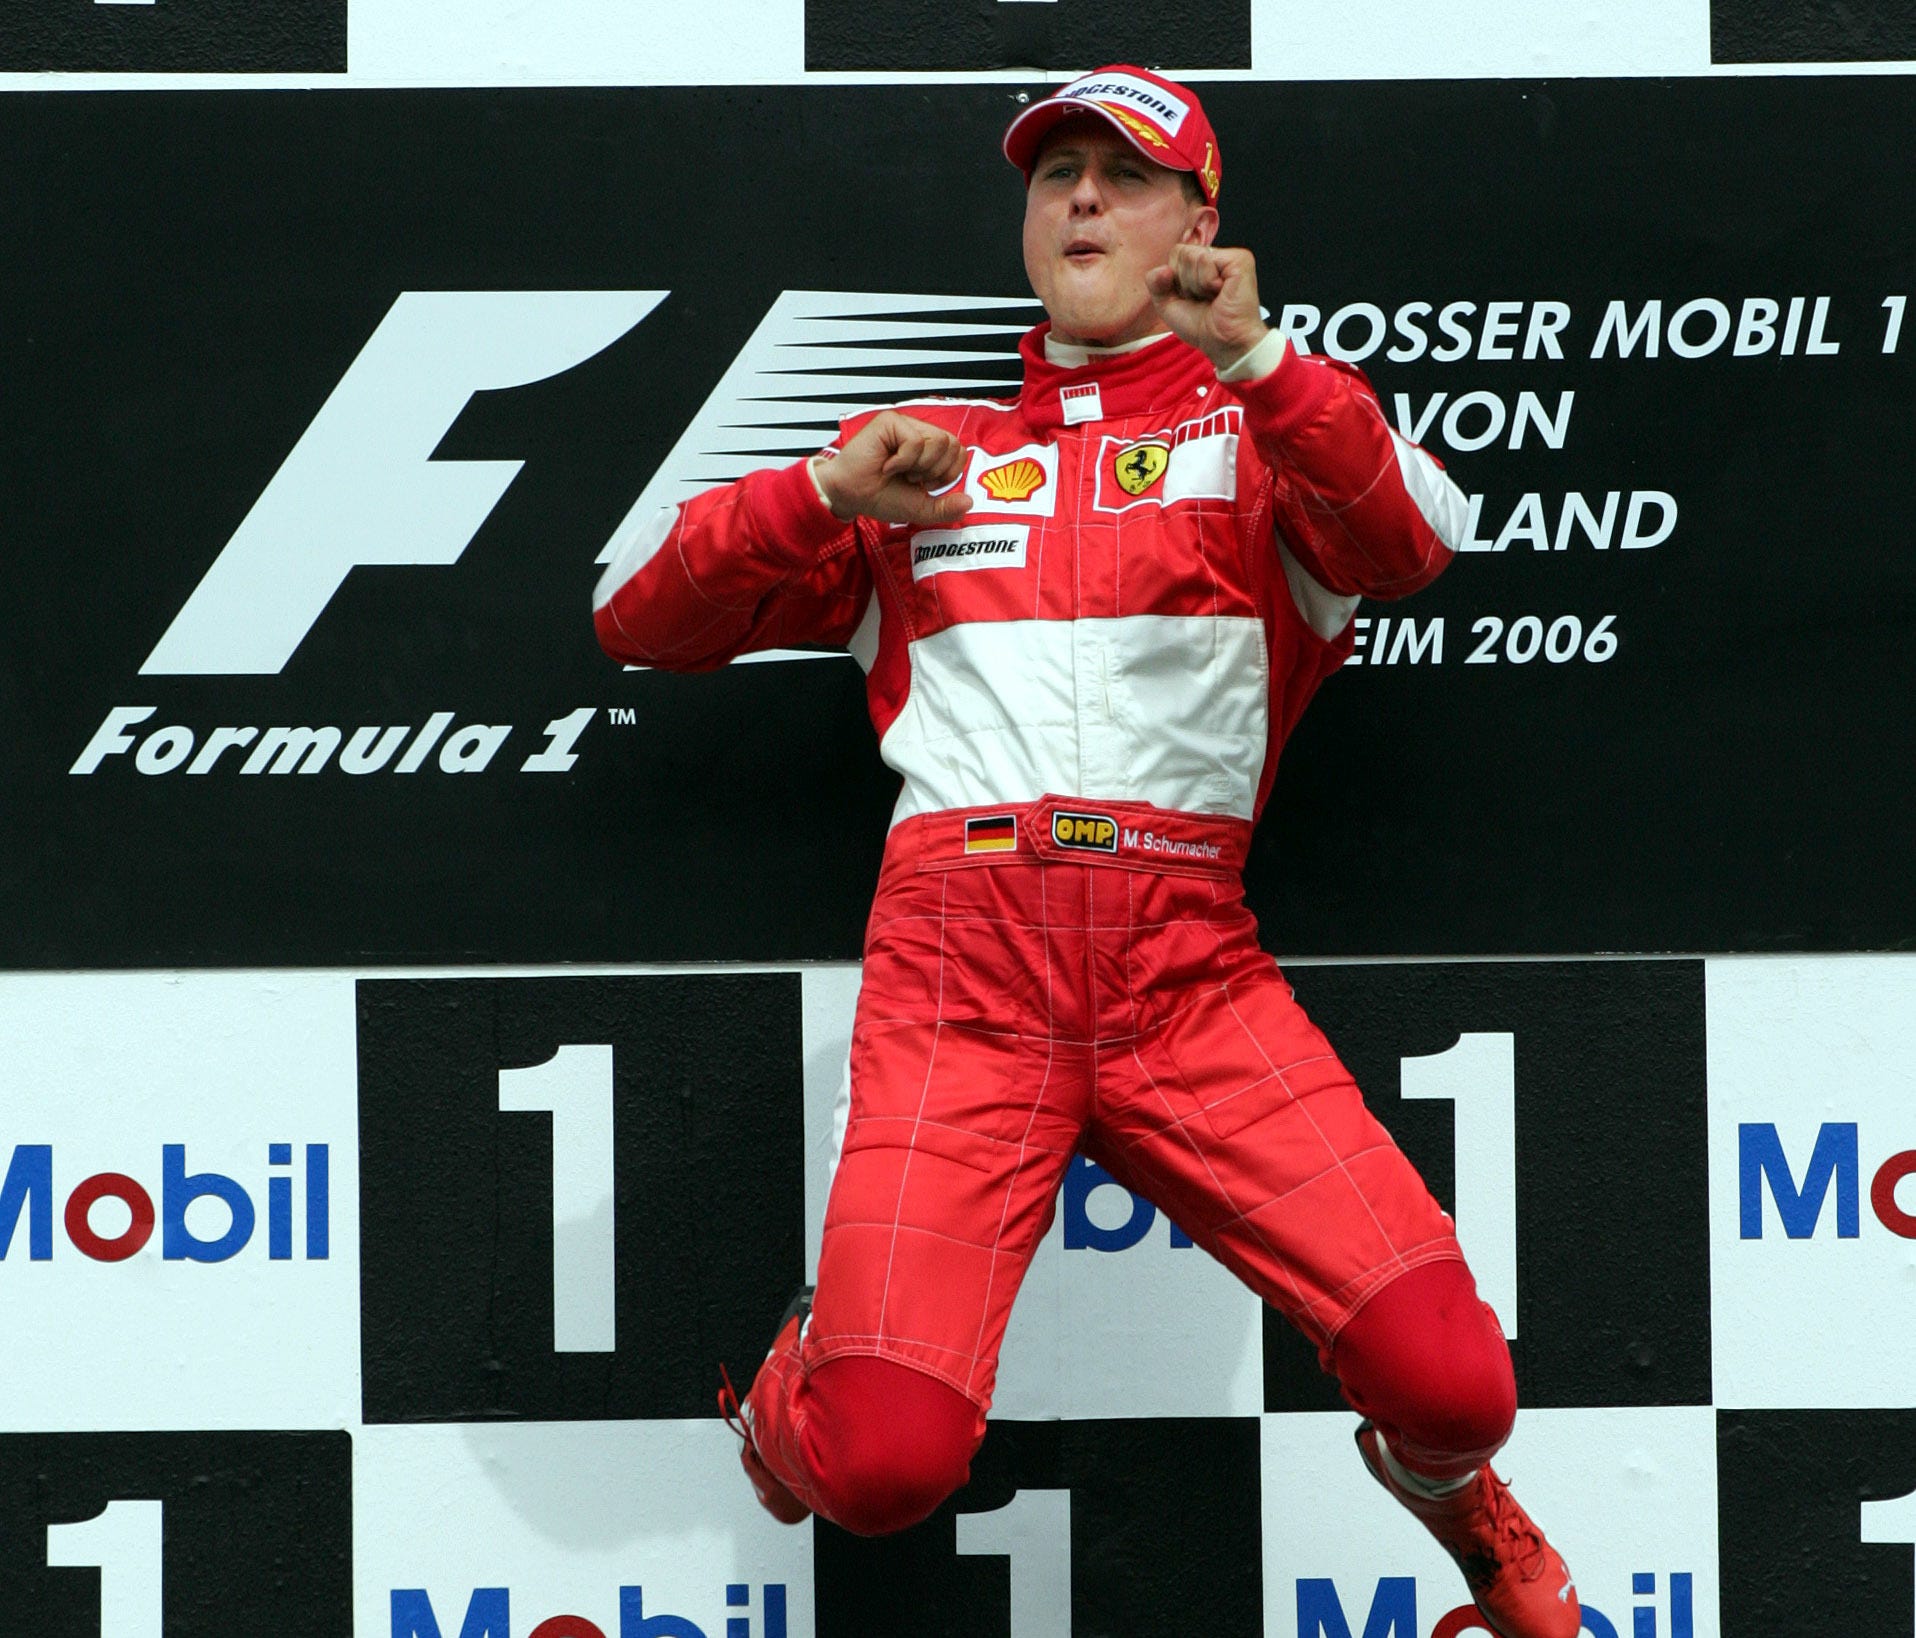 In this July 30, 2006 file photo, Michael Schumacher celebrates after winning the Grand Prix of Germany in Hockenheim, Germany.